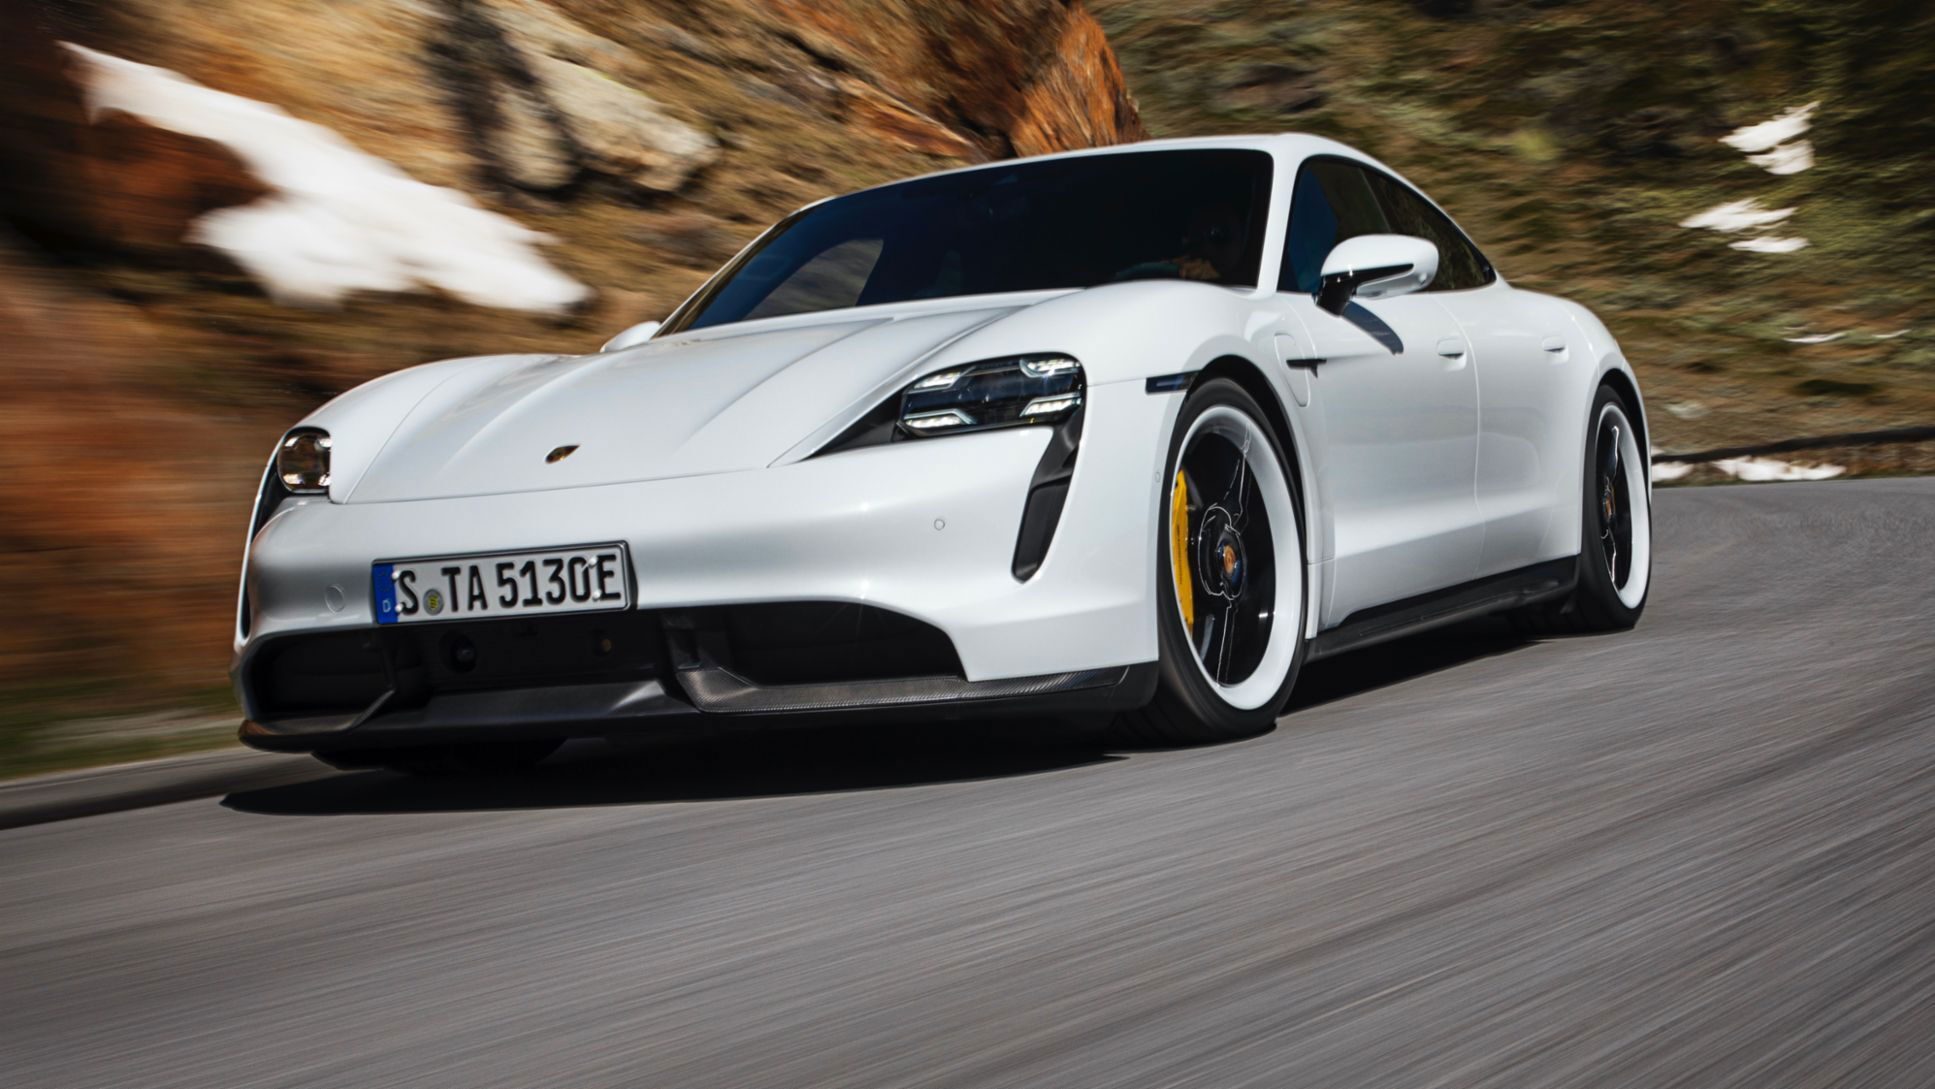 Affordable most technologically advanced cars - 2015 Porsche Taycan.